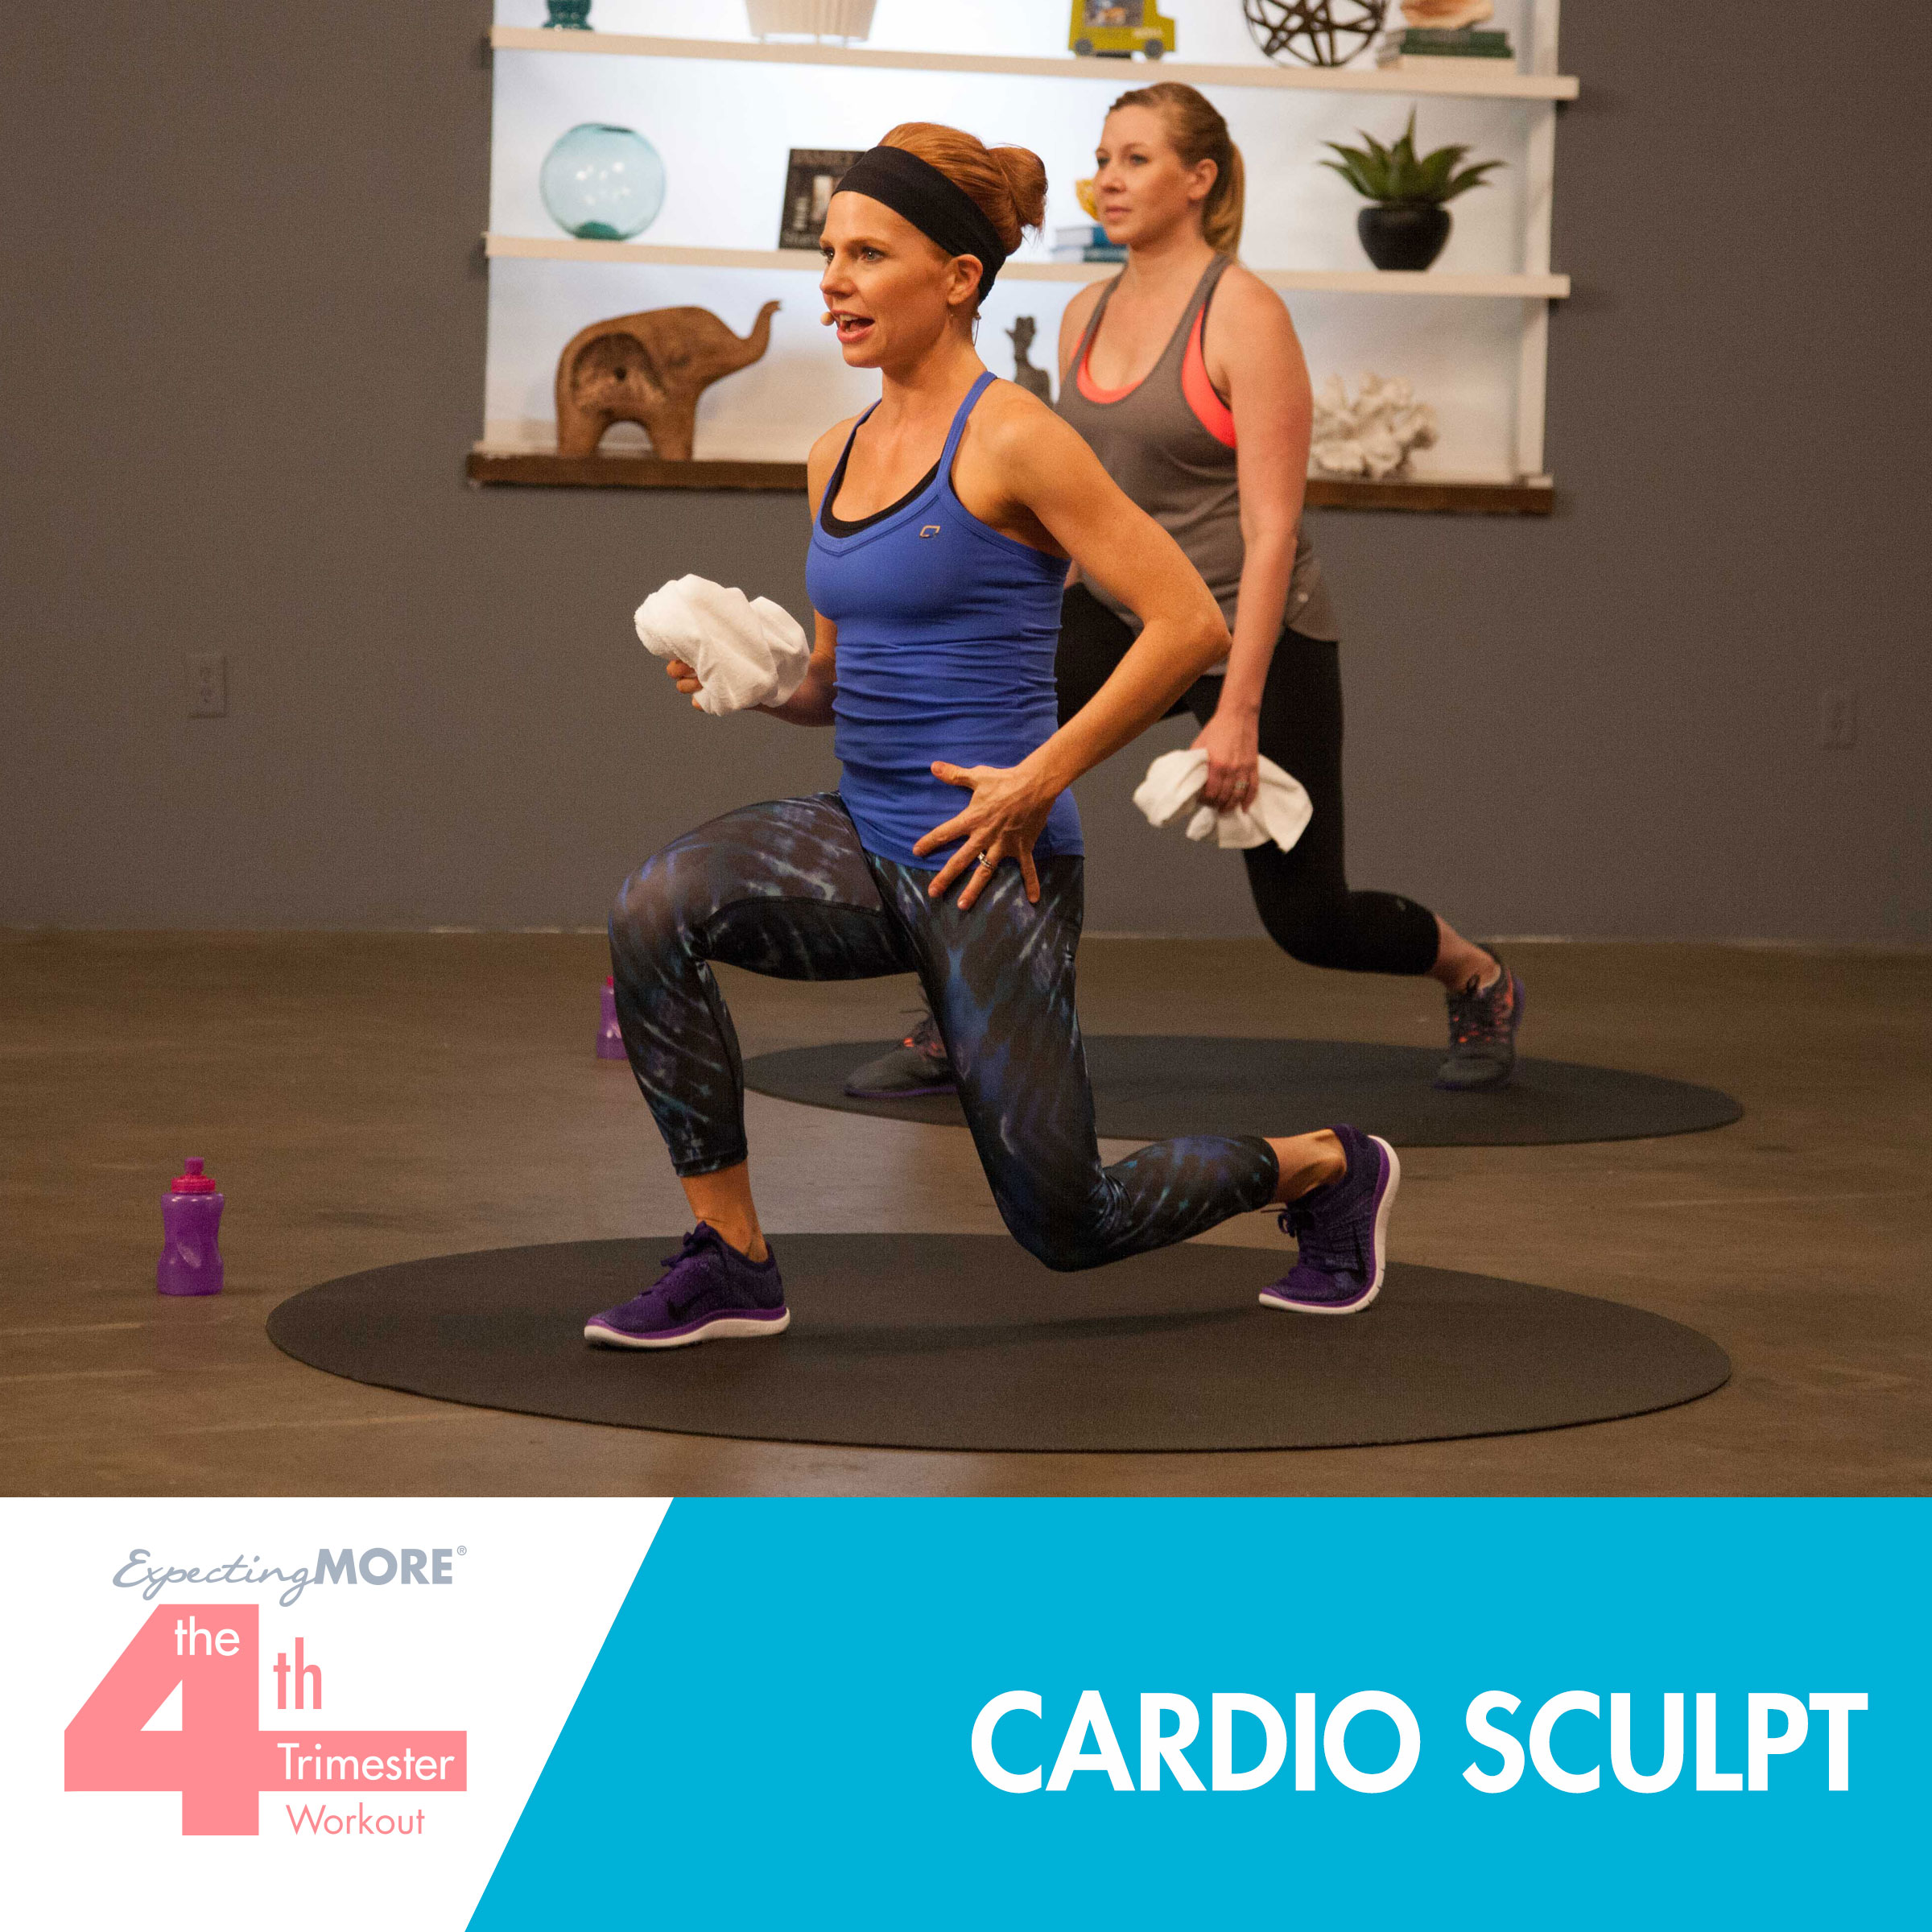 Cardio Sculpt Workout  Cardio workout at home, Cardio, At home workouts